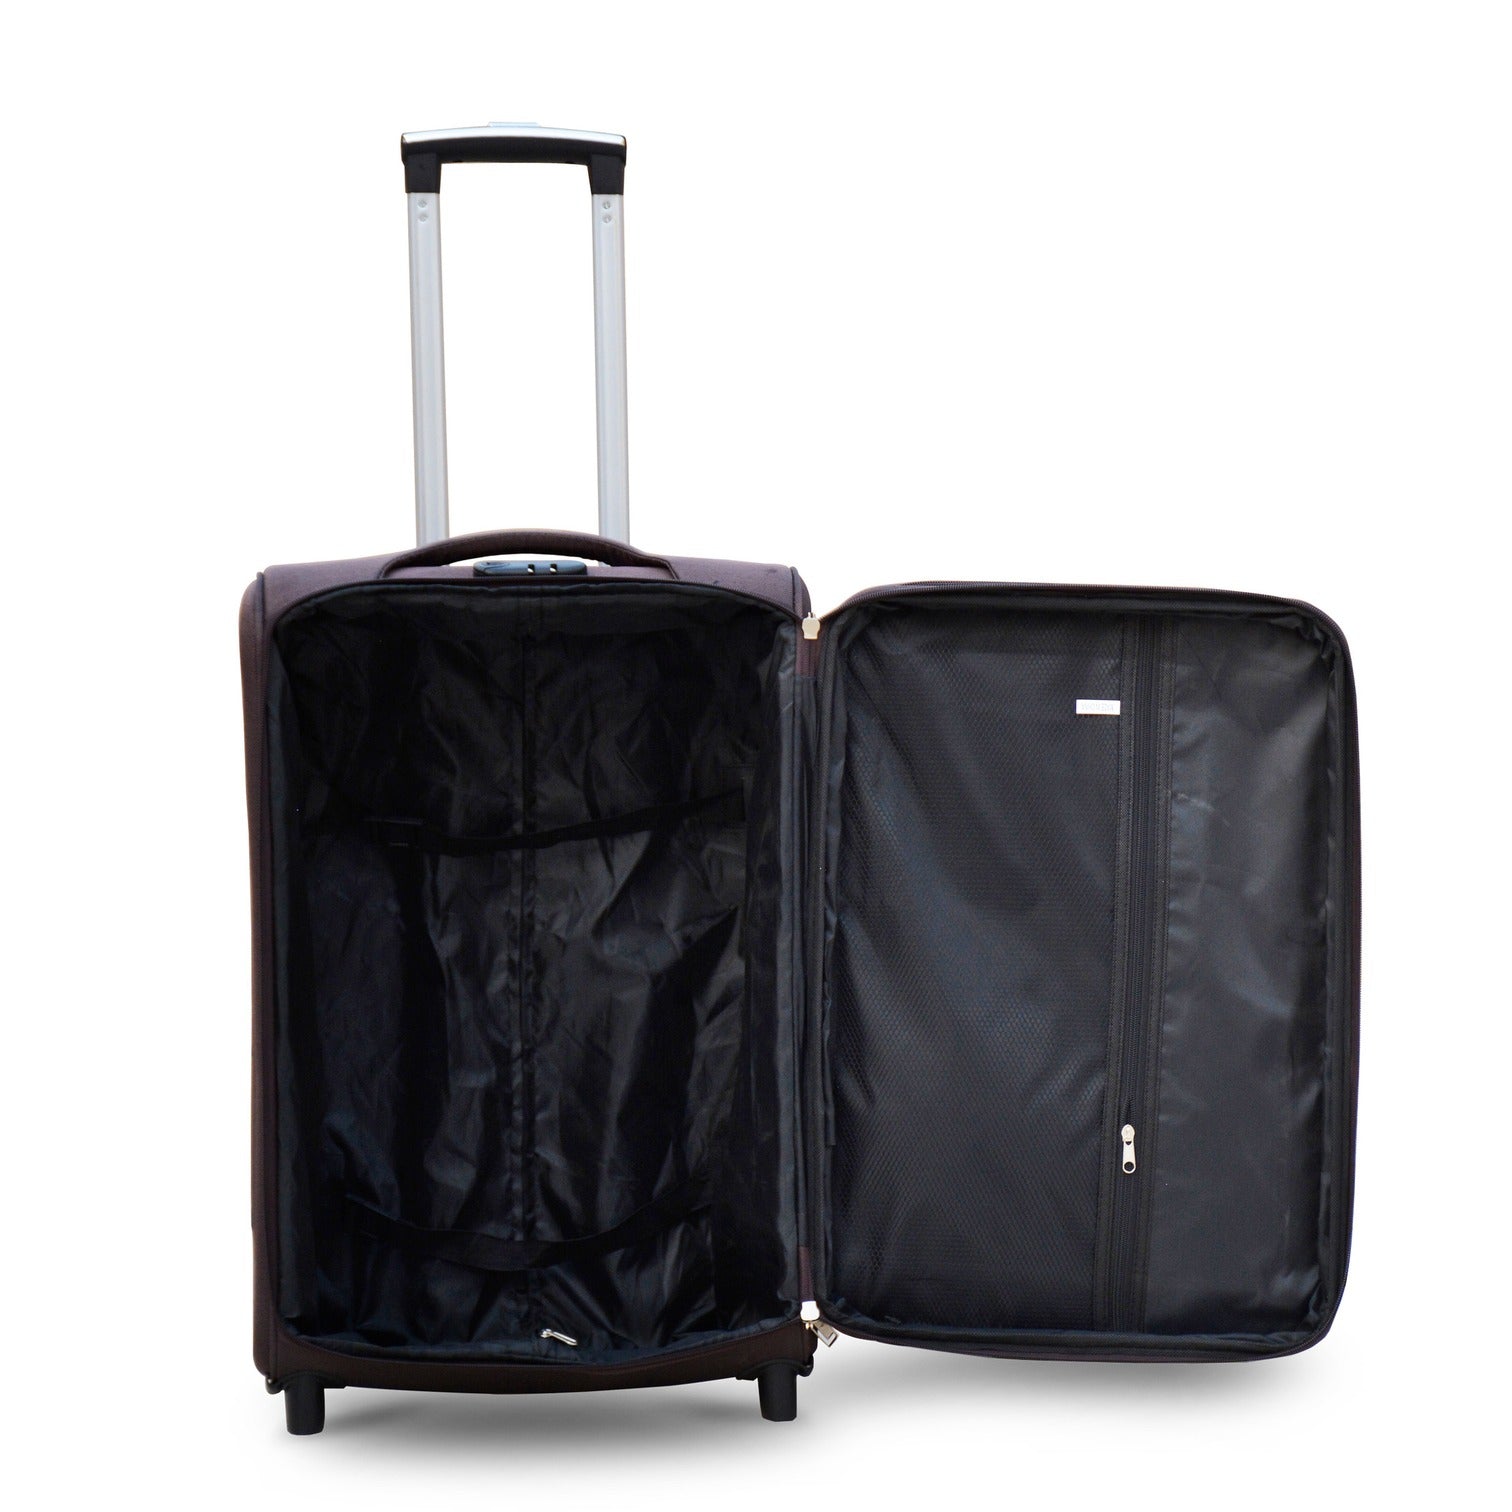 20" LP 2 Wheel 0161 Lightweight Soft Material Carry On Luggage Bag